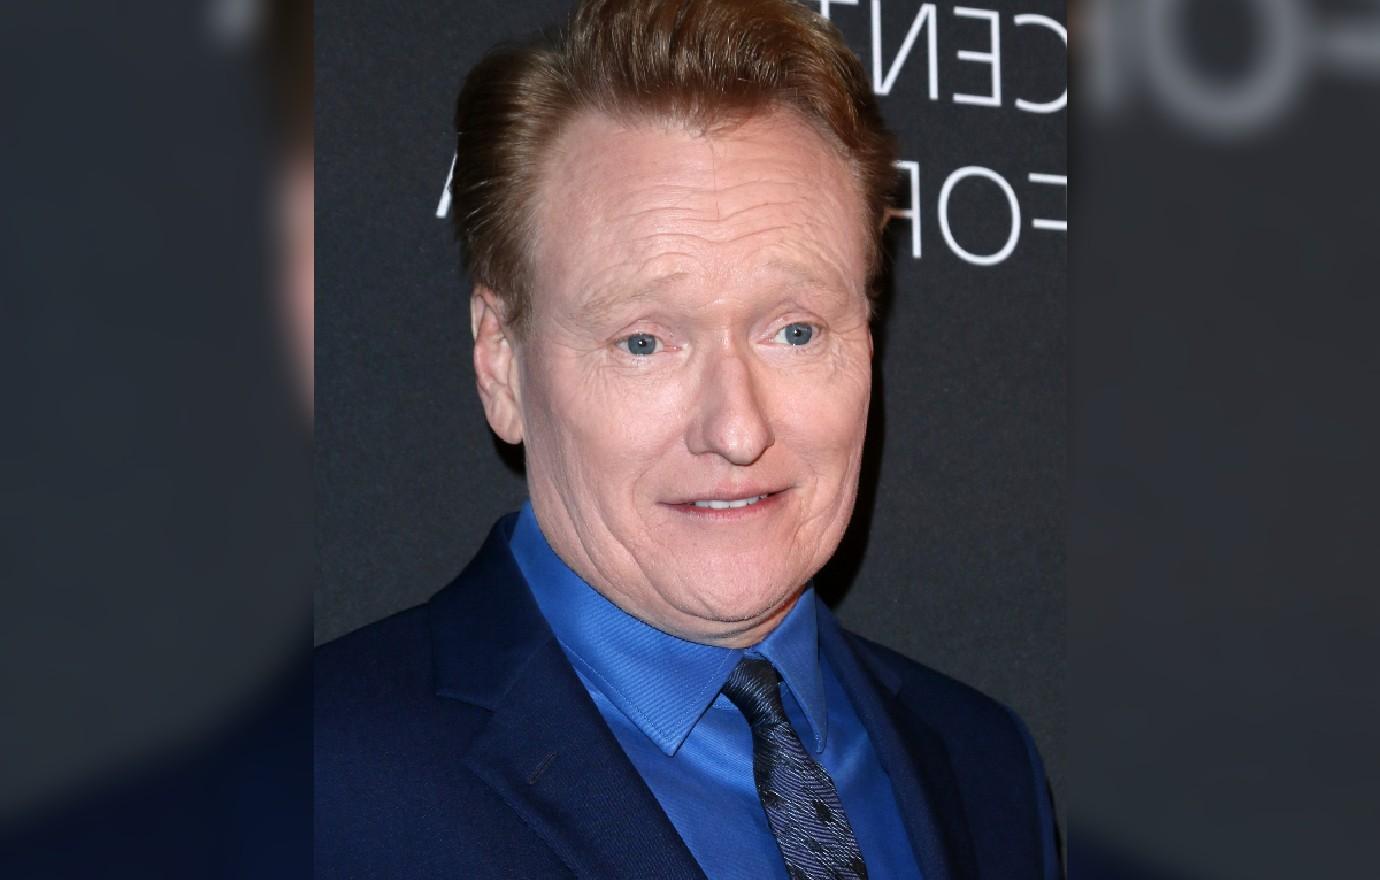 Conan O'Brien says that Trump hurting comedy is his biggest crime